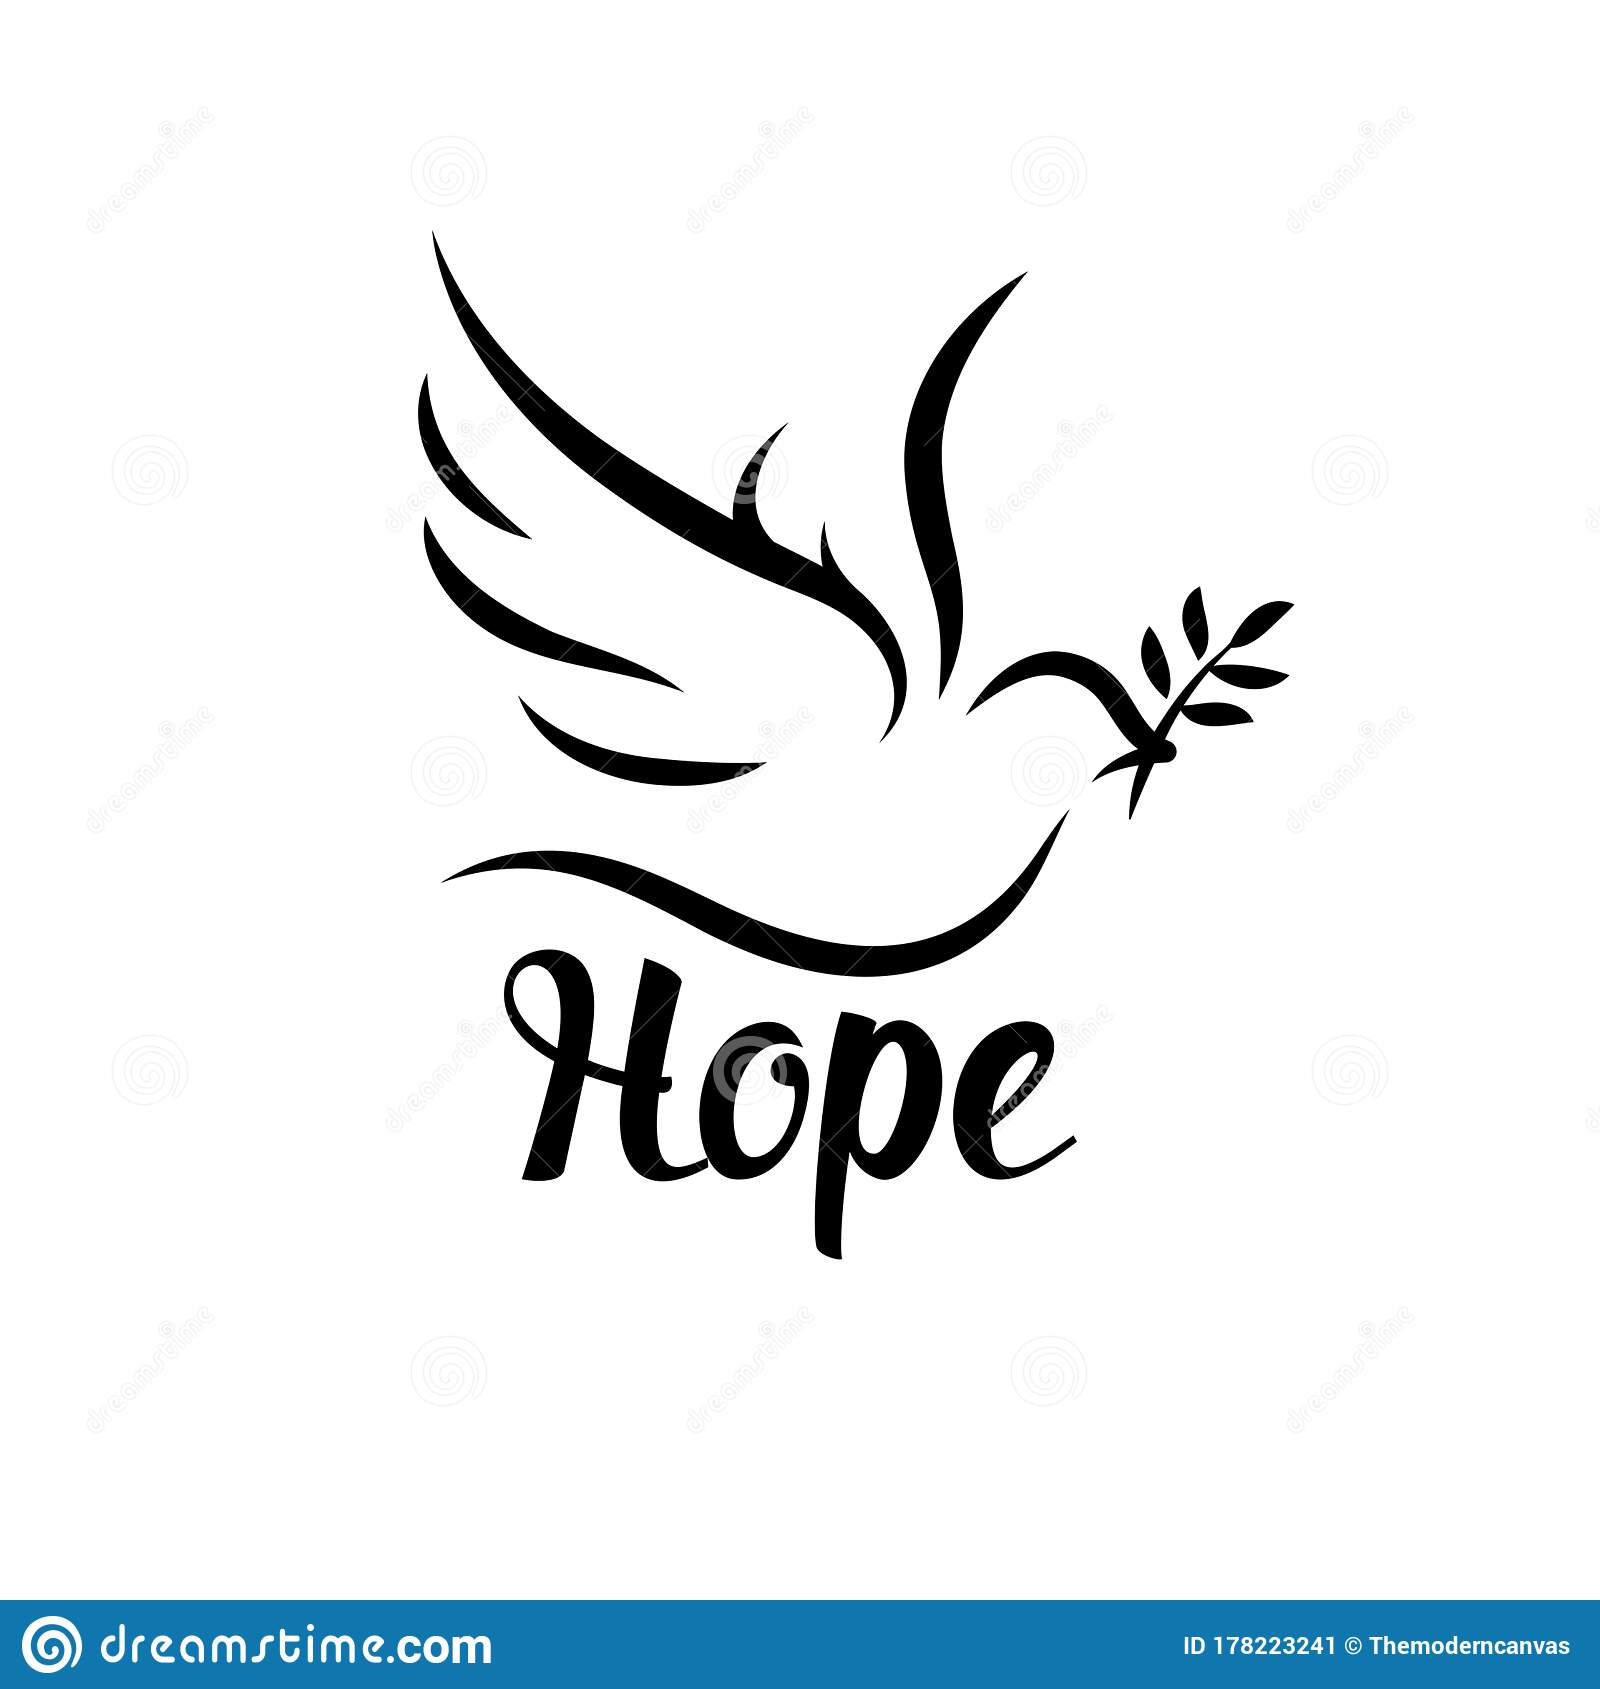 What is dove of Hope?